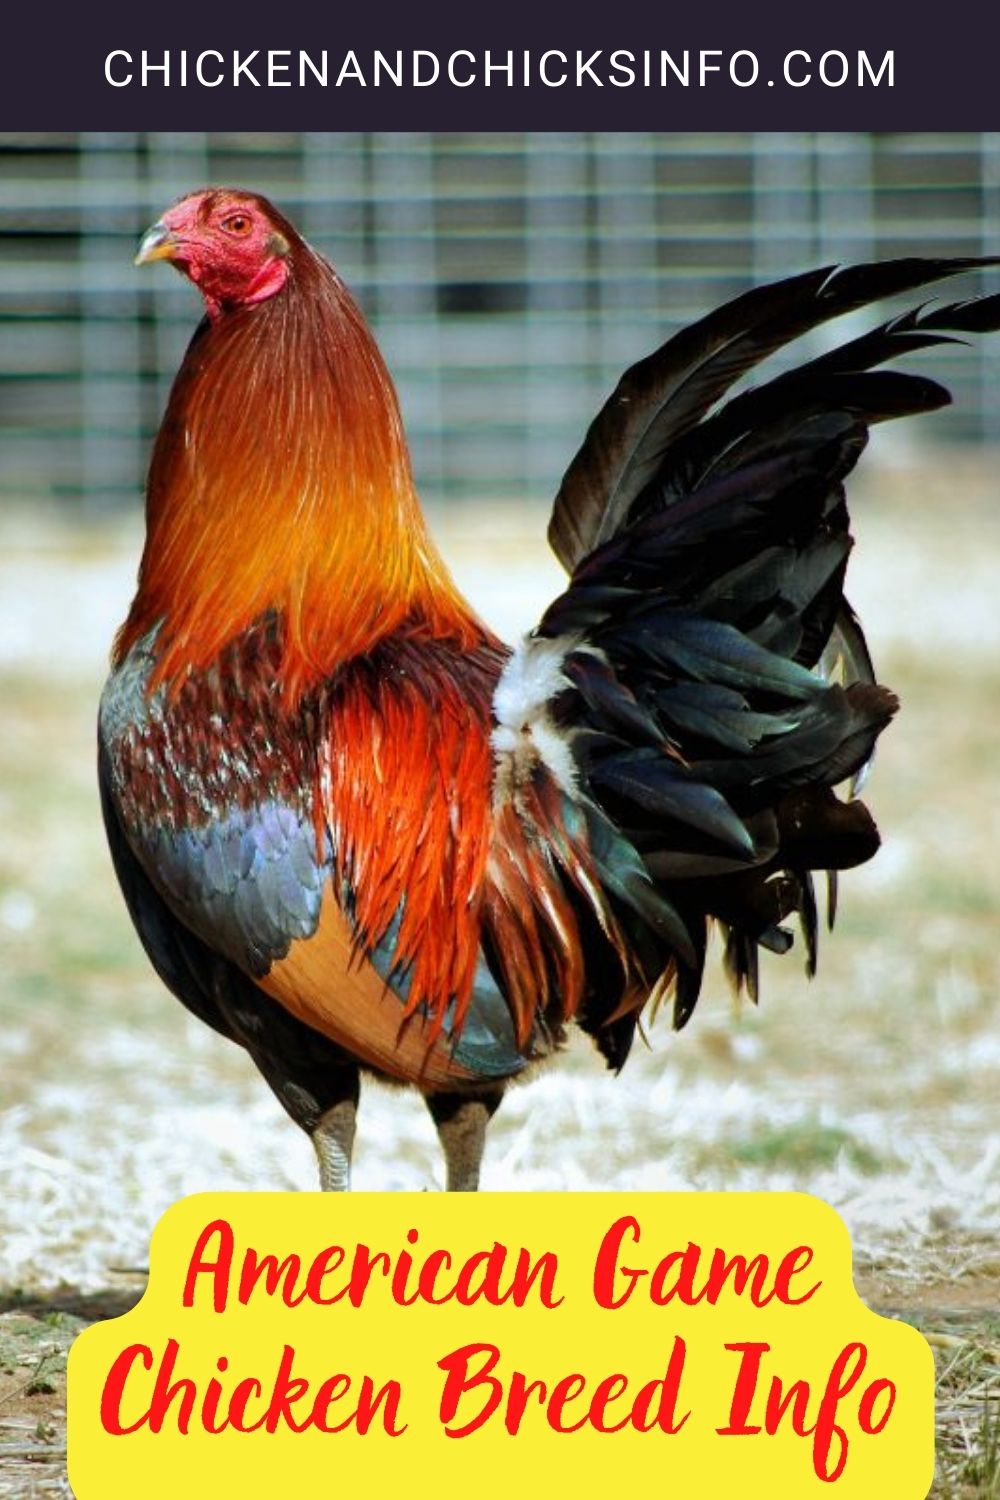 American Game Chicken Breed Info pinterest image.